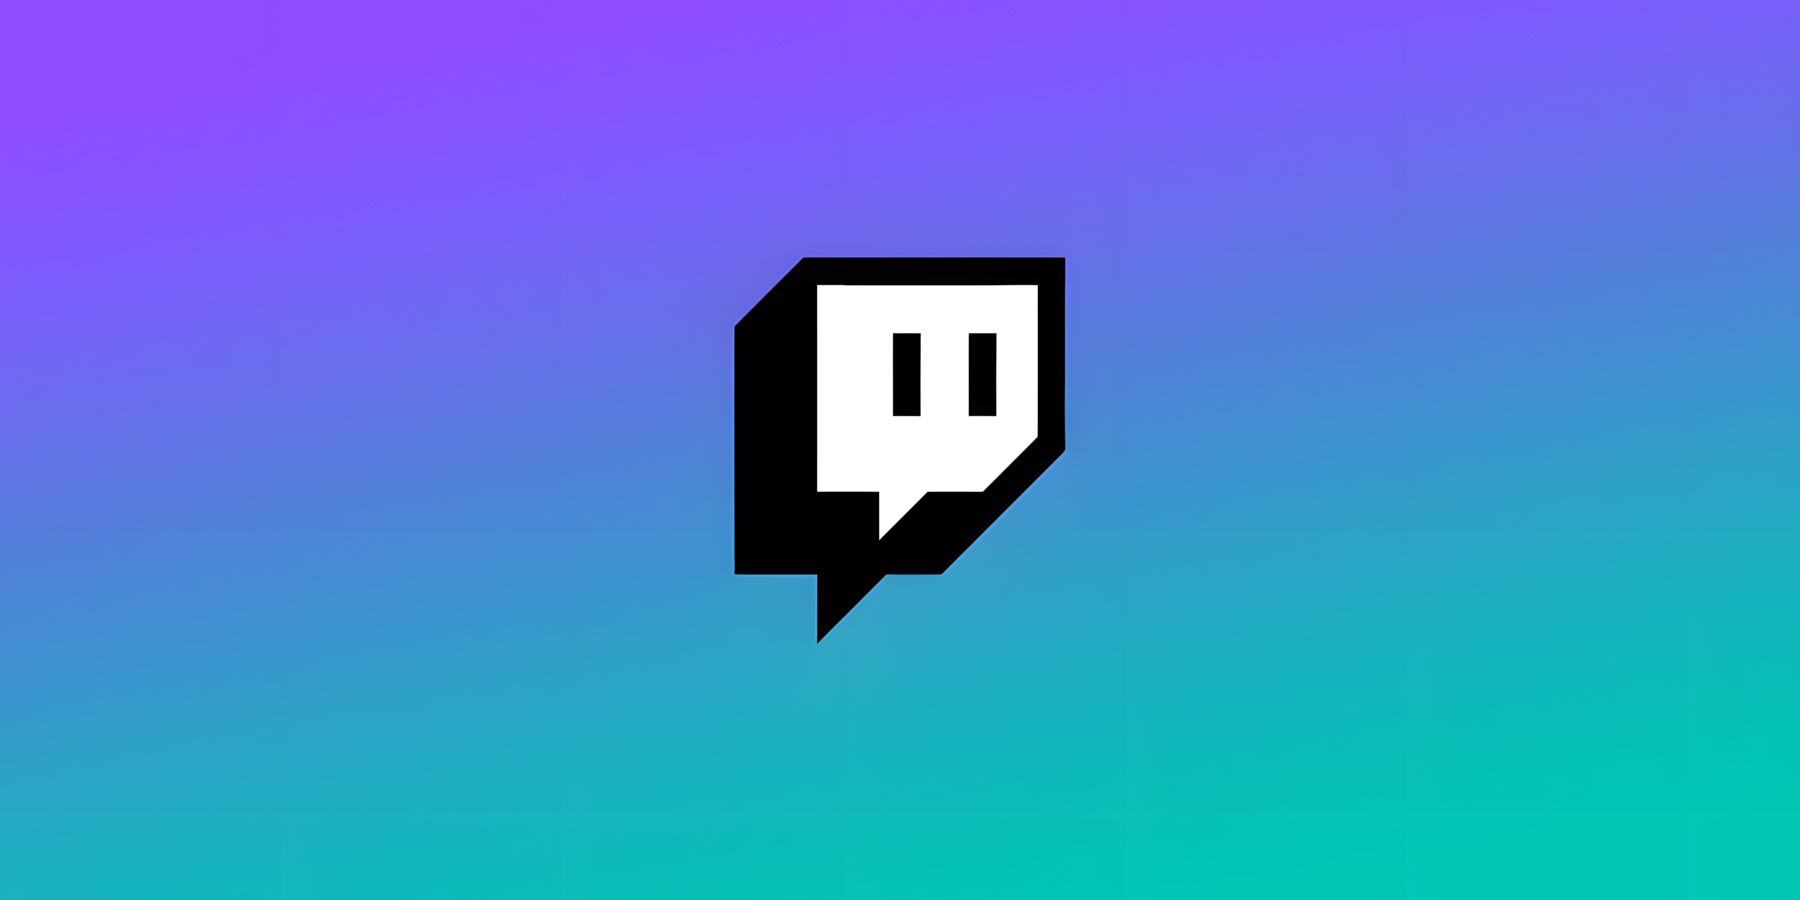 Twitch logo over a multicolor background